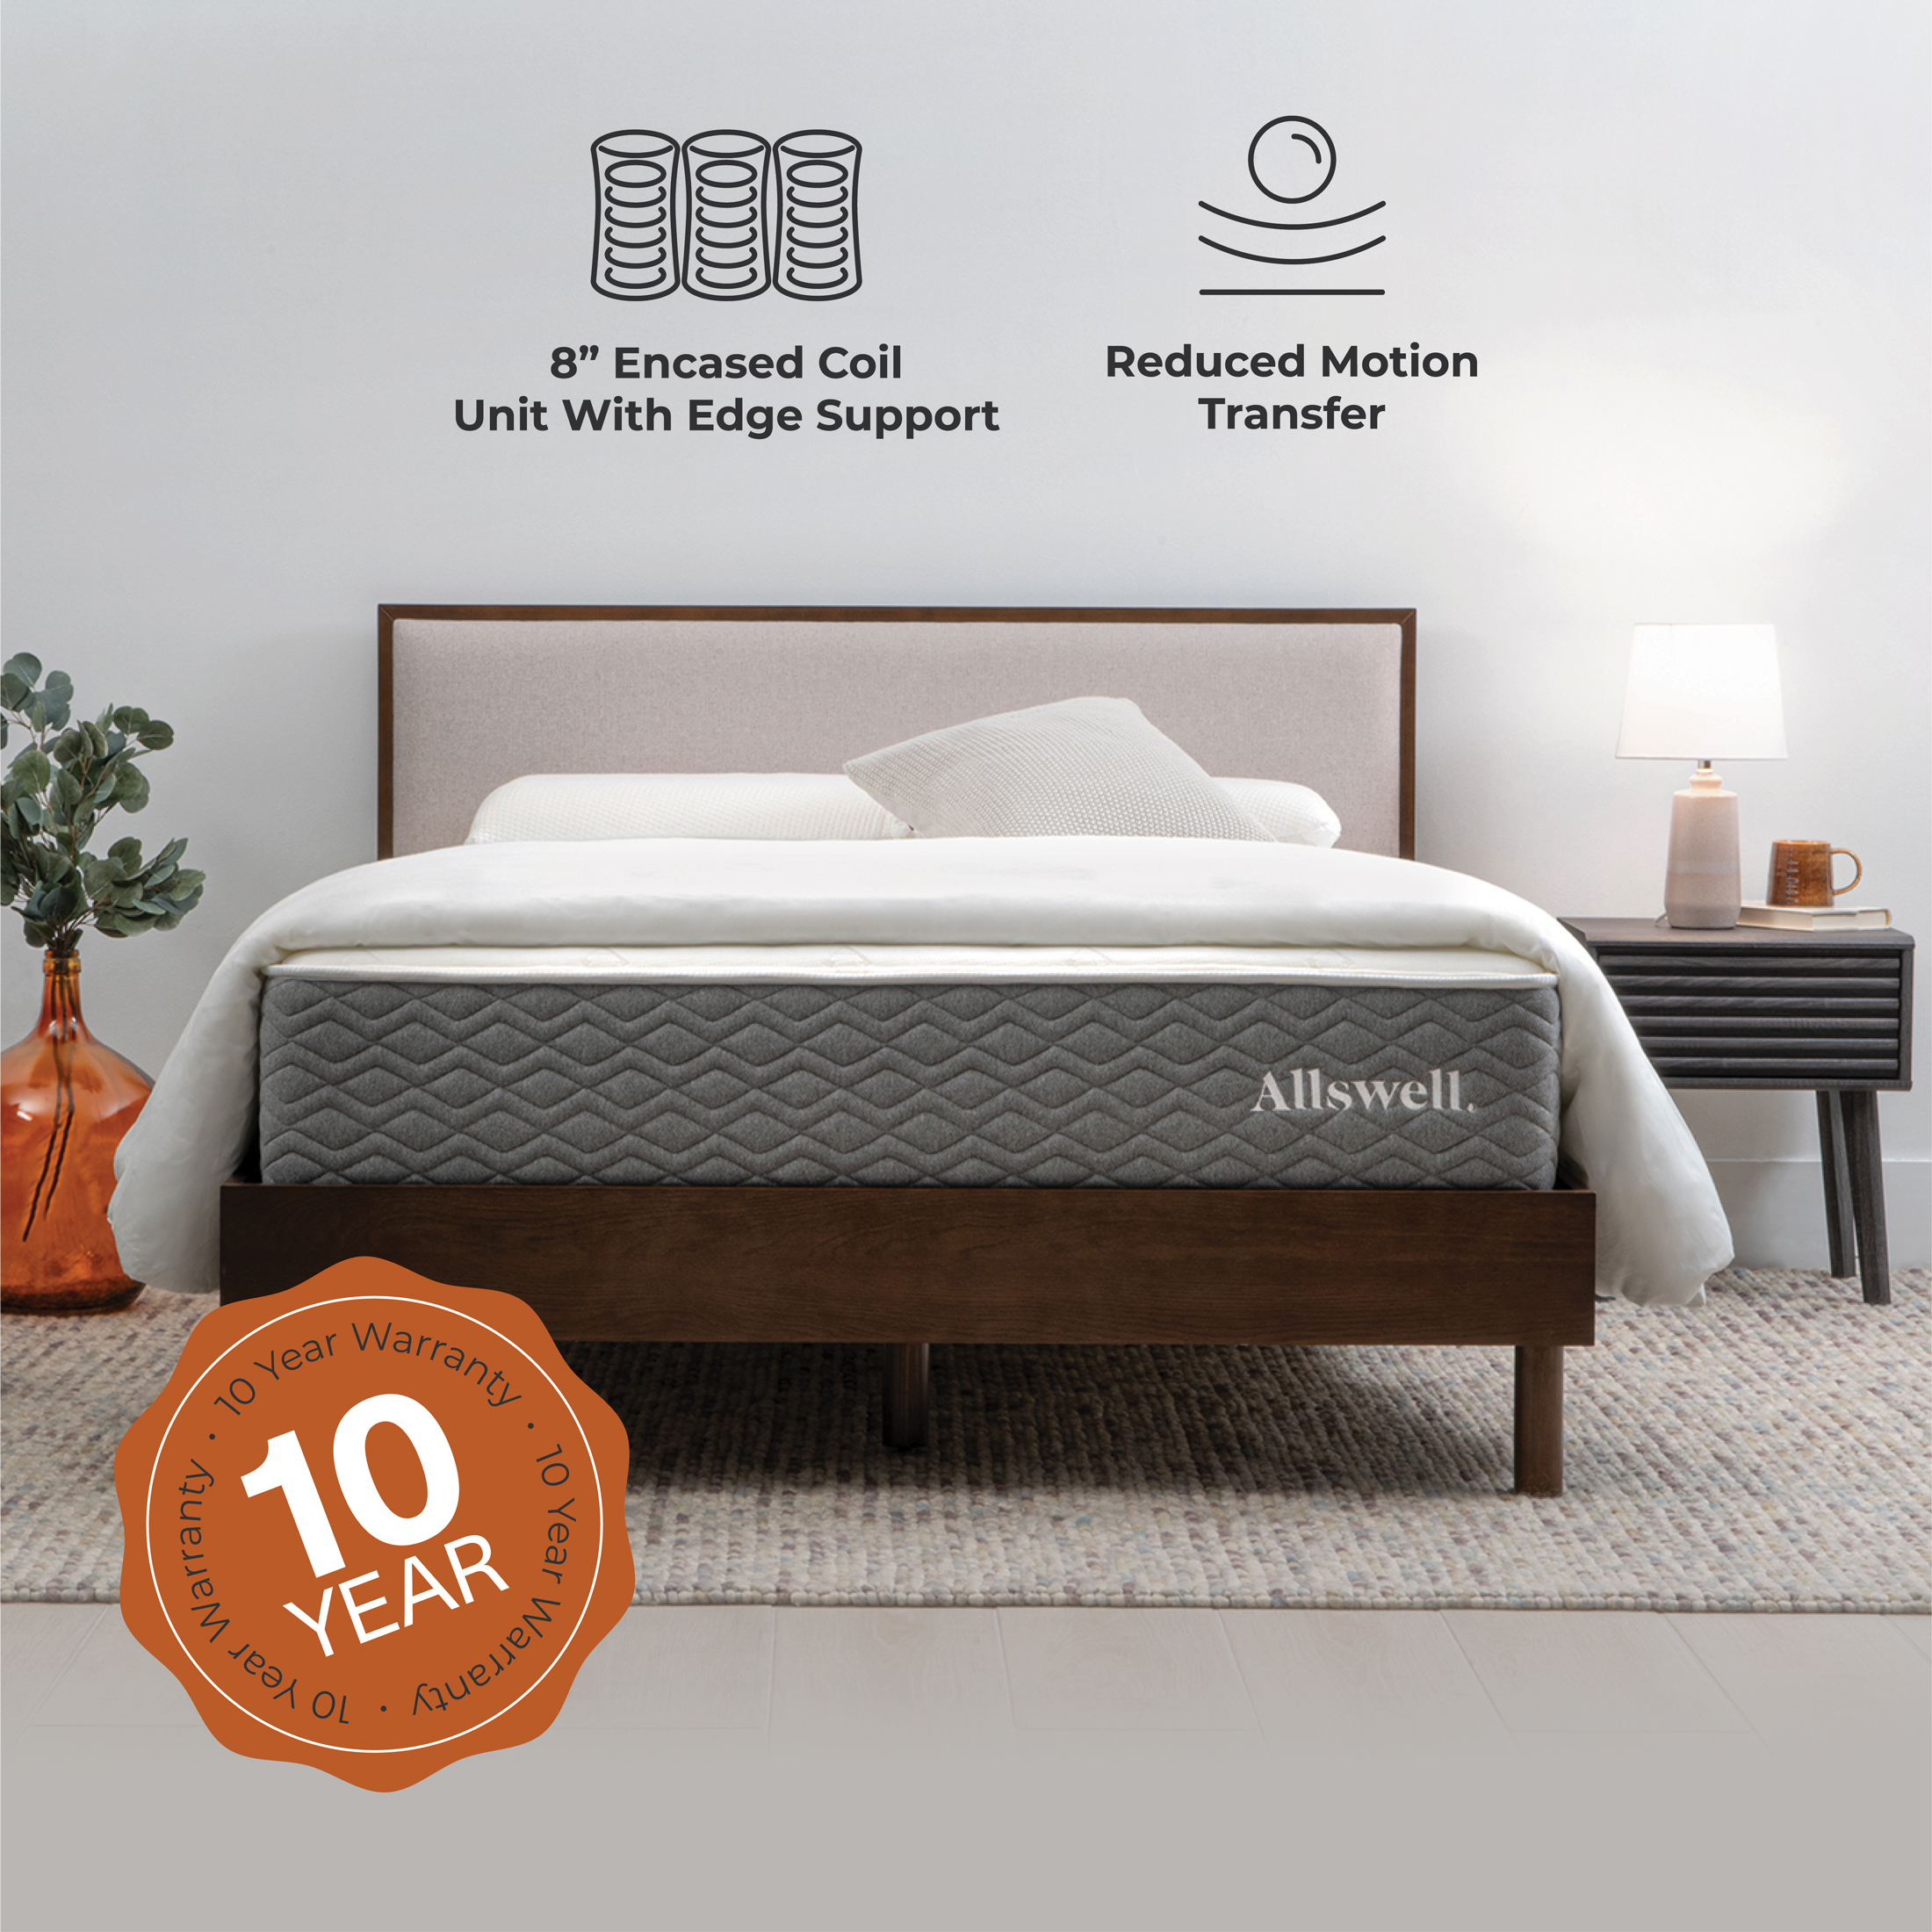 The Allswell Luxe 12" Bed in a Box Hybrid Mattress, Queen - image 4 of 7